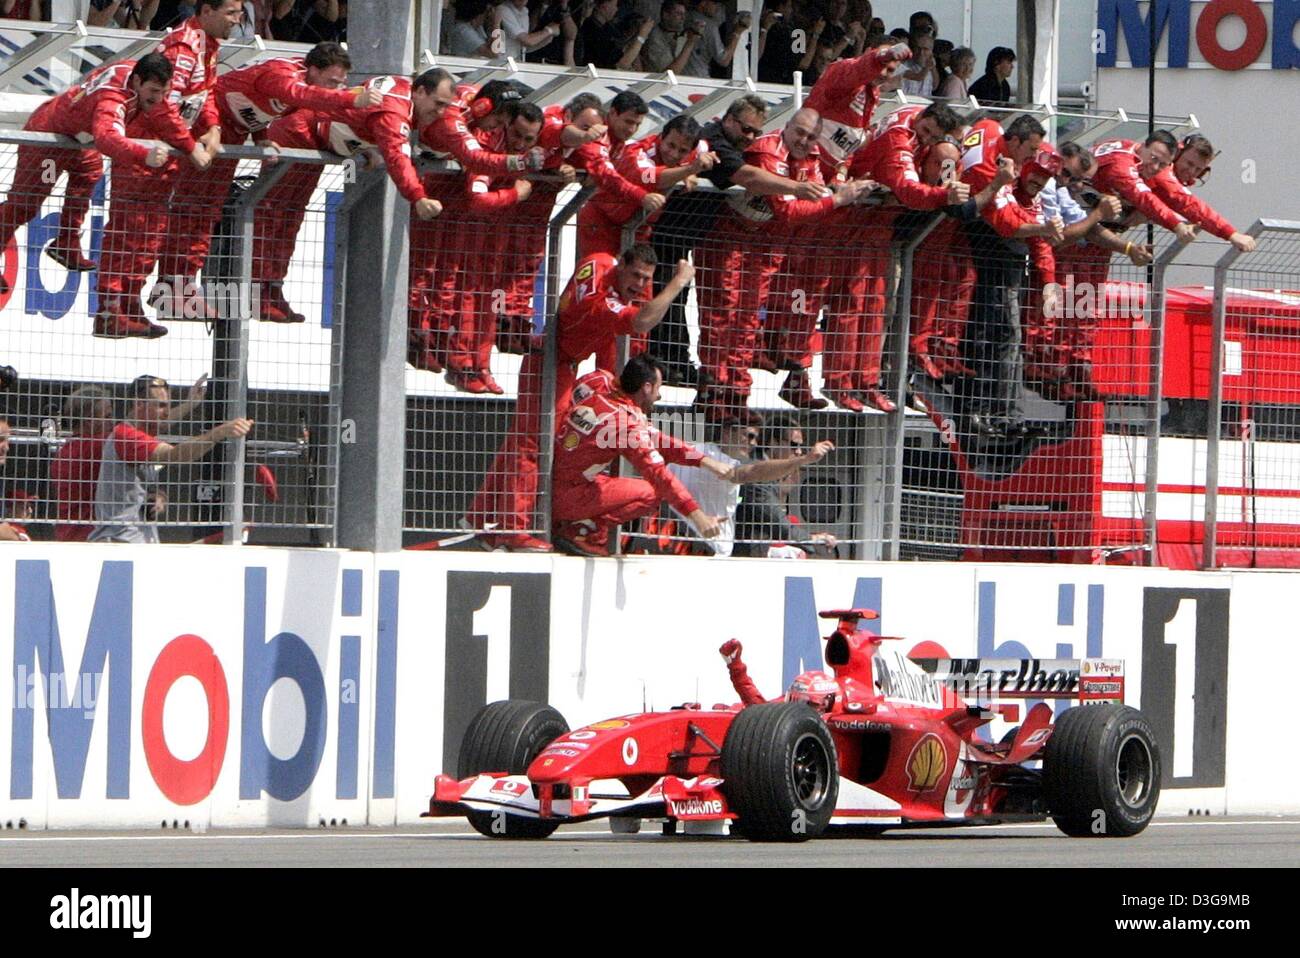 (dpa) - Another race, another victory for Schumacher and his Ferrari ...